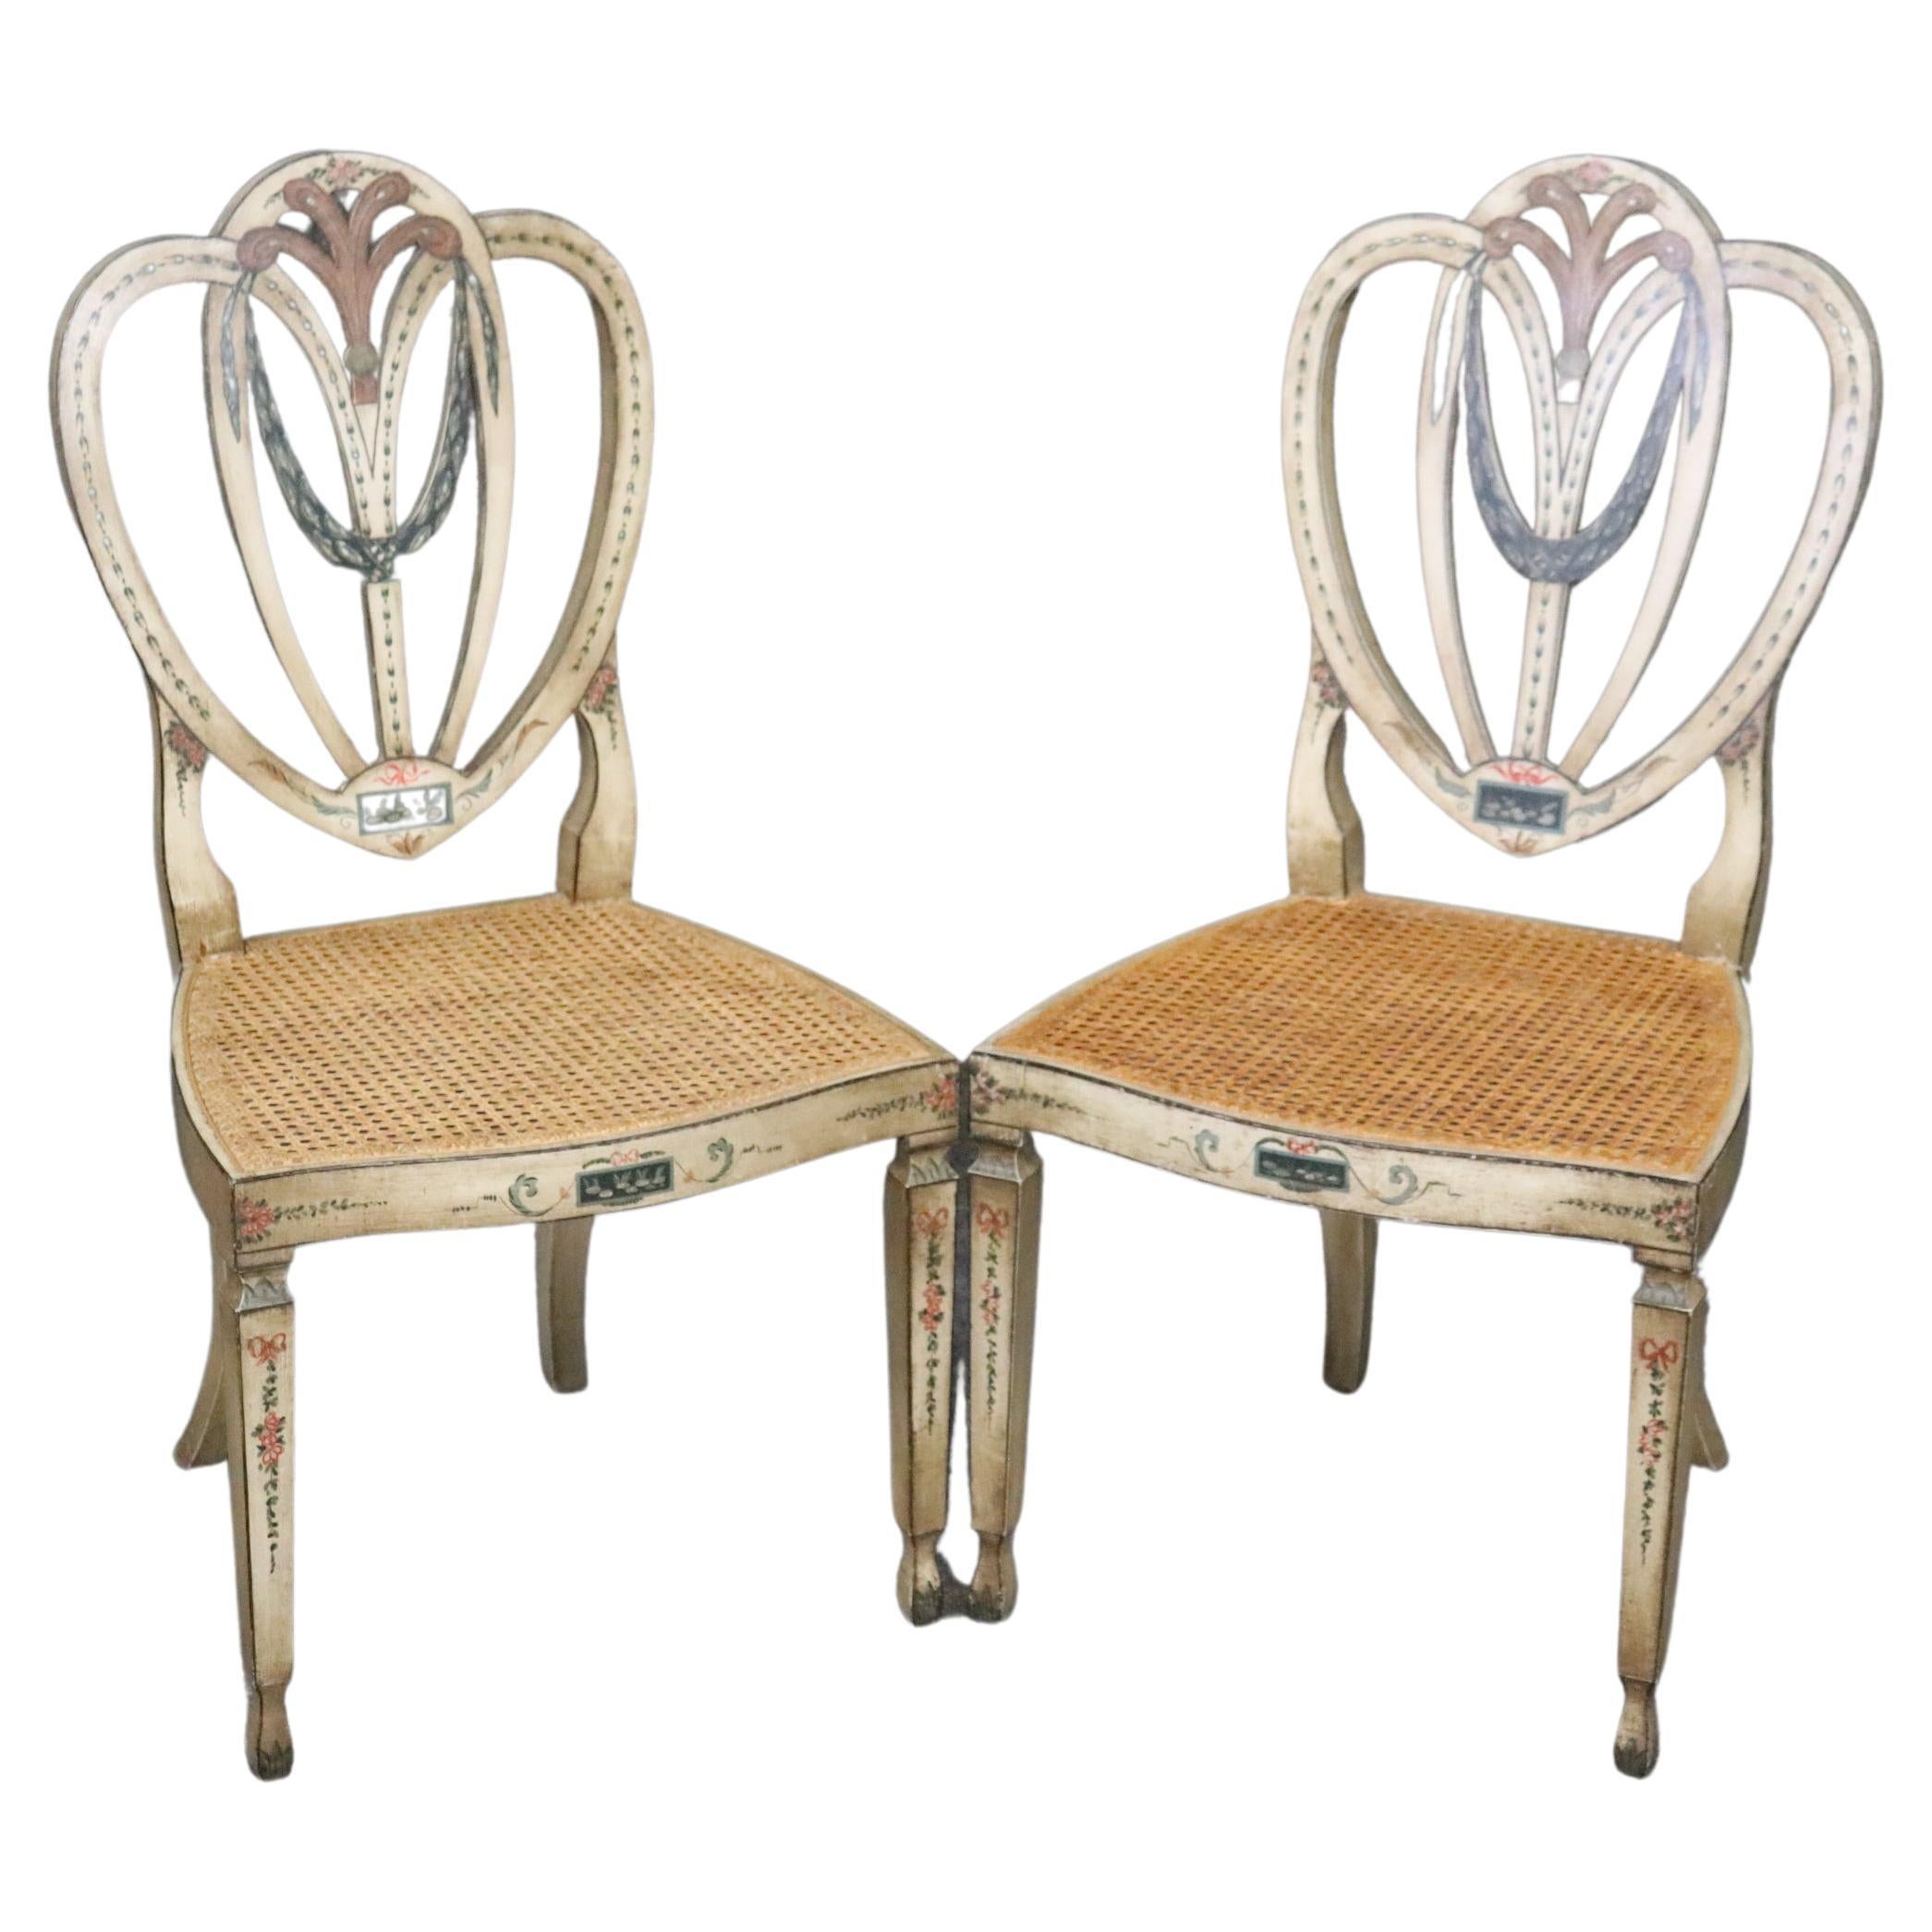 Pair of Sweetheart Back Cane Paint Decorated Adams Side Chairs Circa 1920